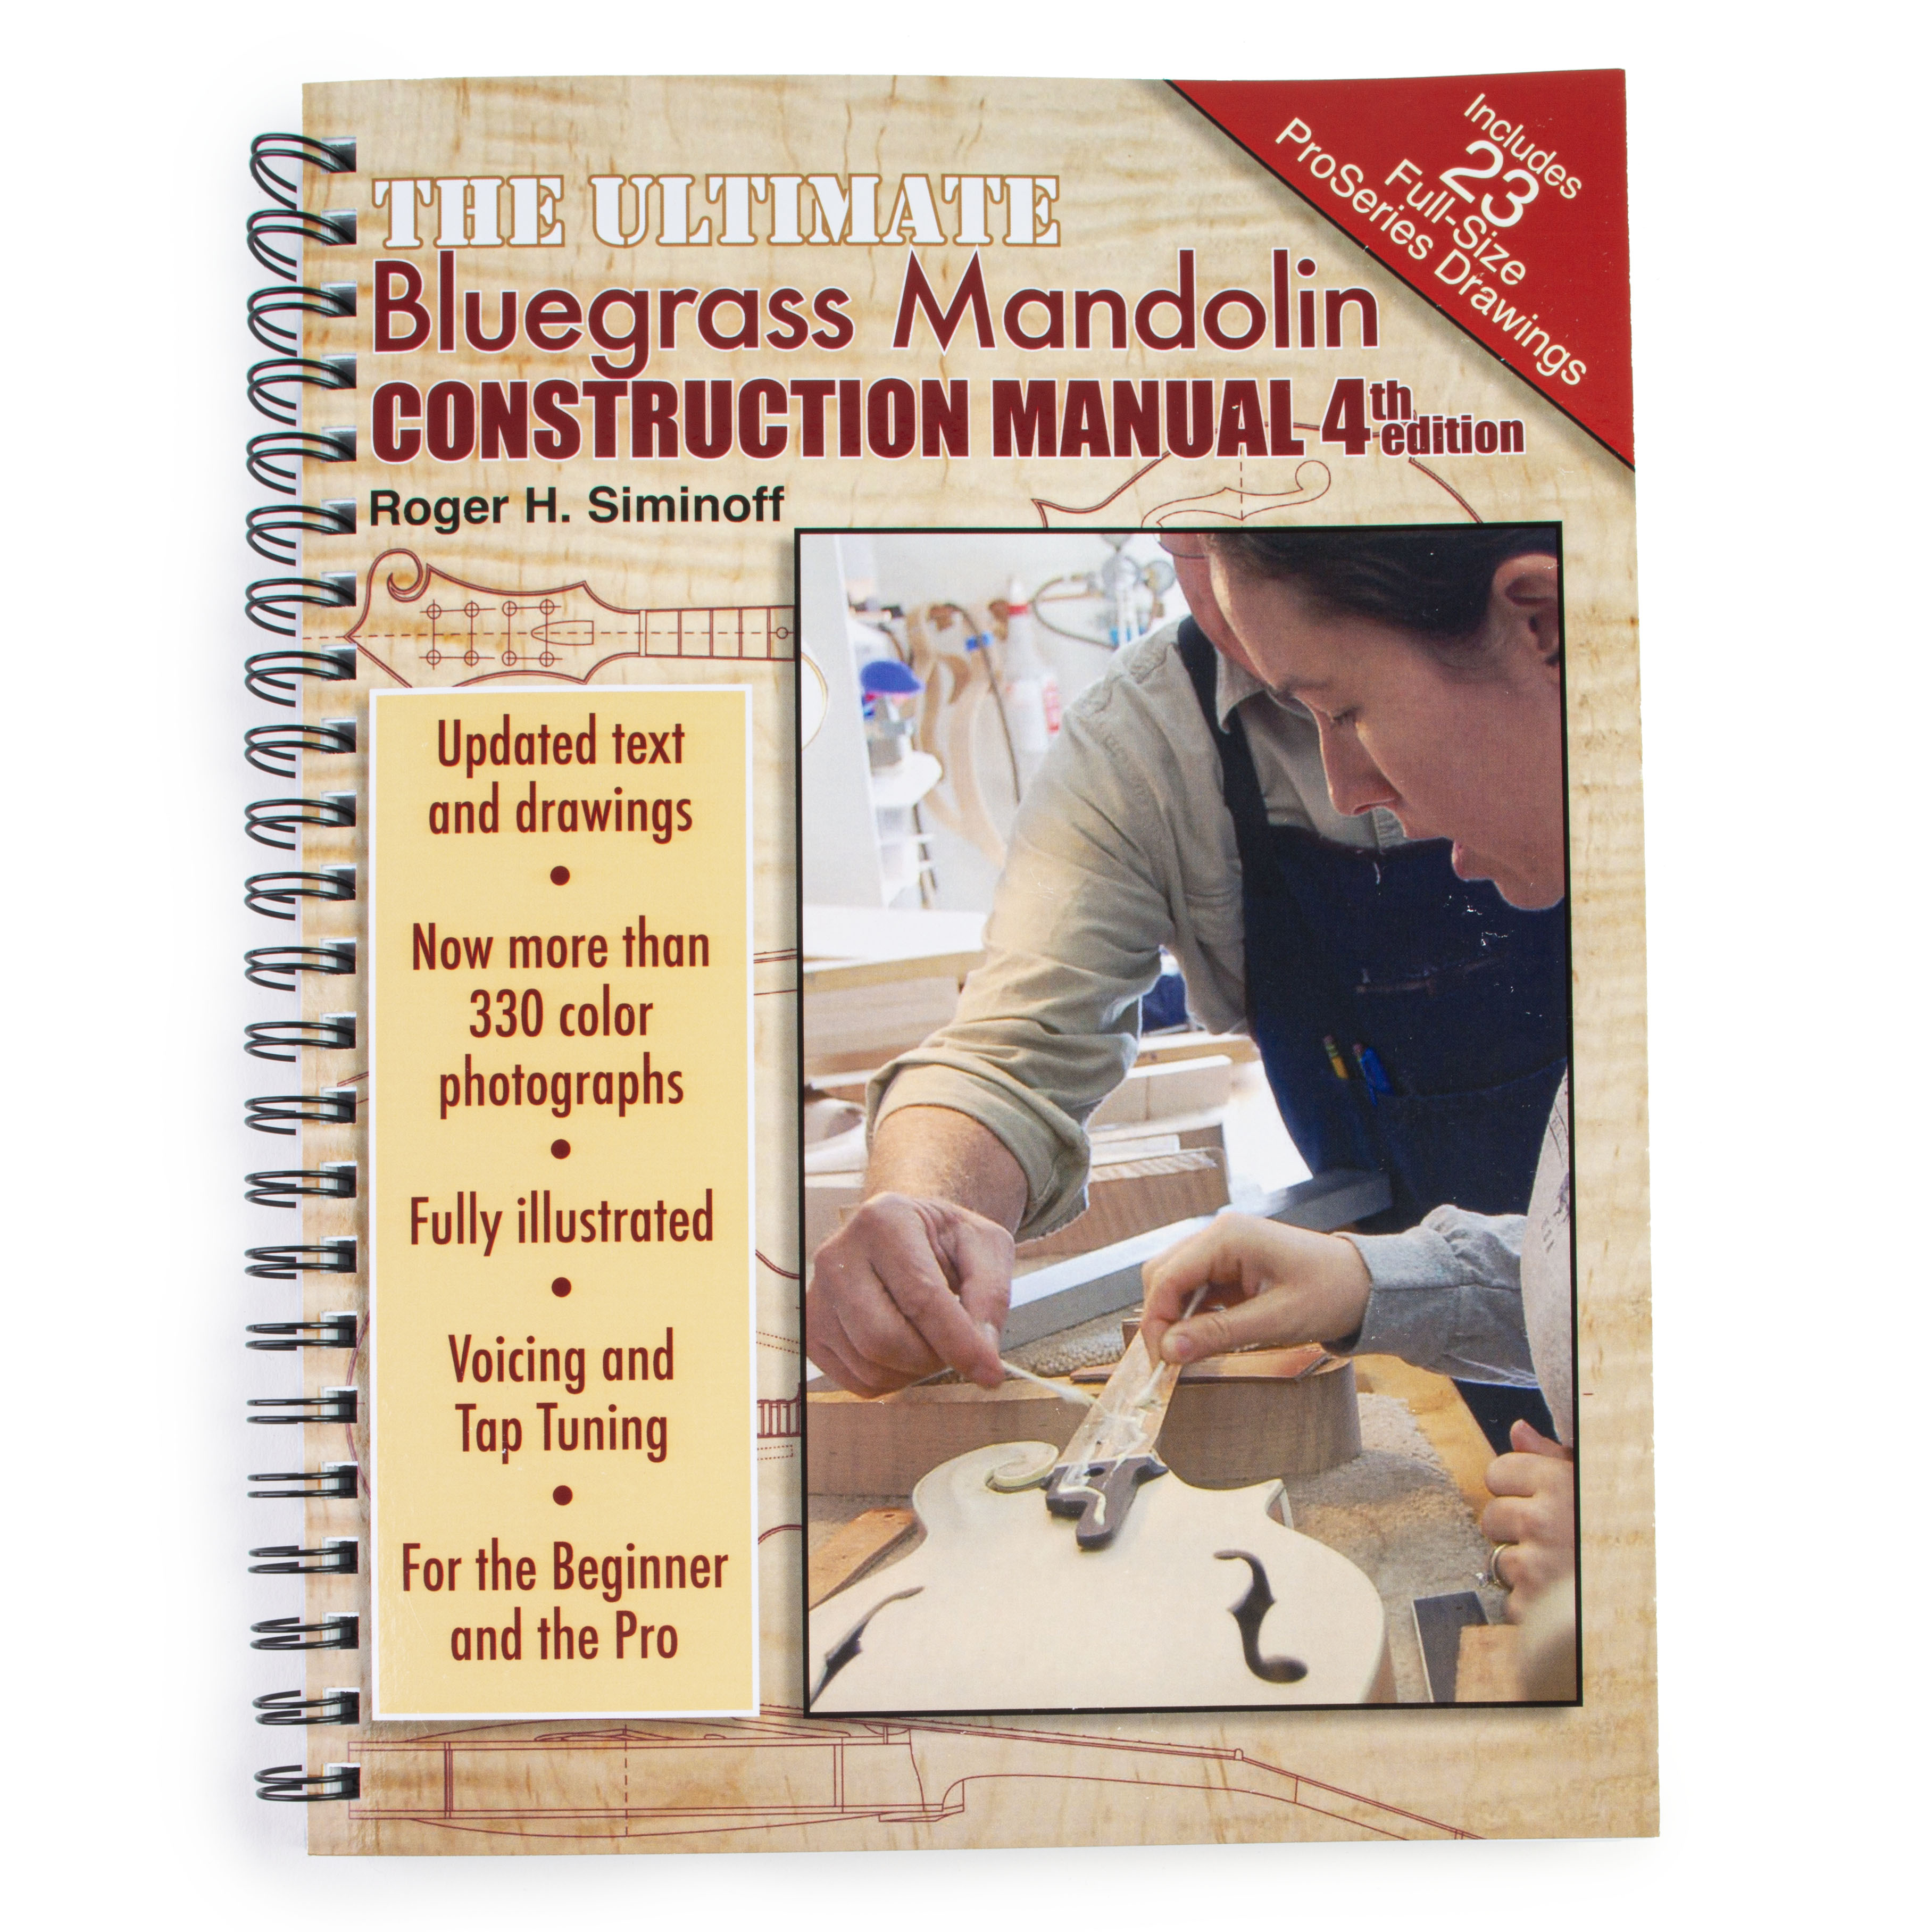 The Ultimate Bluegrass Mandolin Construction Manual - 4th Edition